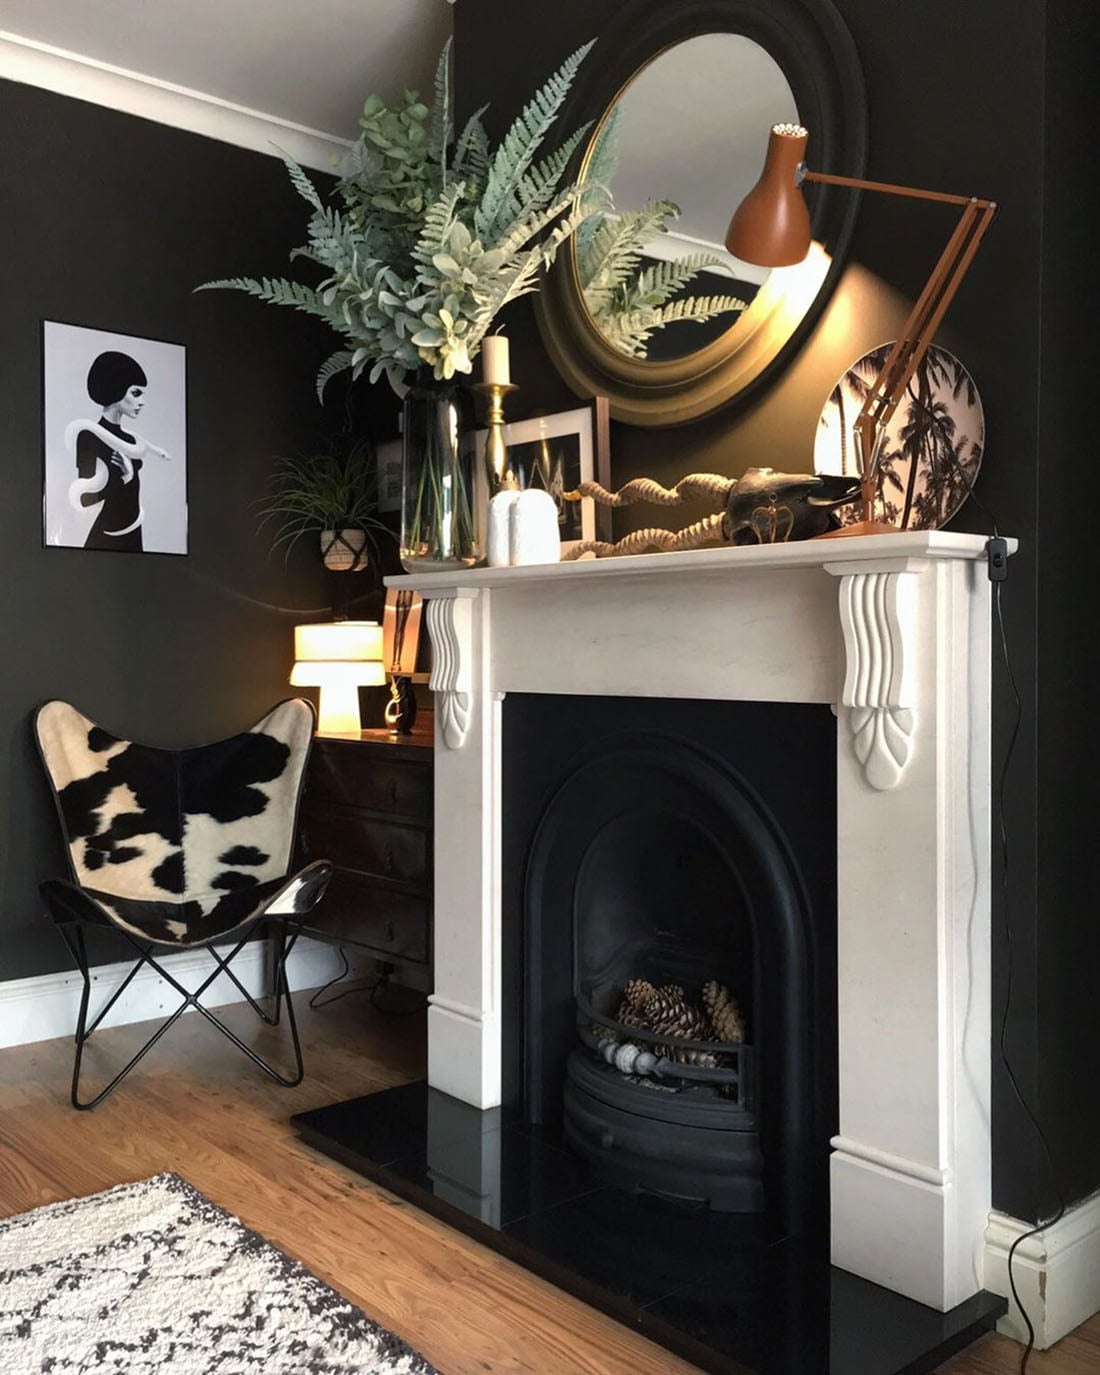 Dark & Gold Gallery Walls • Maximalist Home Tour • Little Gold Pixel • All photos © Nadia @artynads #maximalist #decor #glam #modern #dark #gold #homedecor #gallerywalls